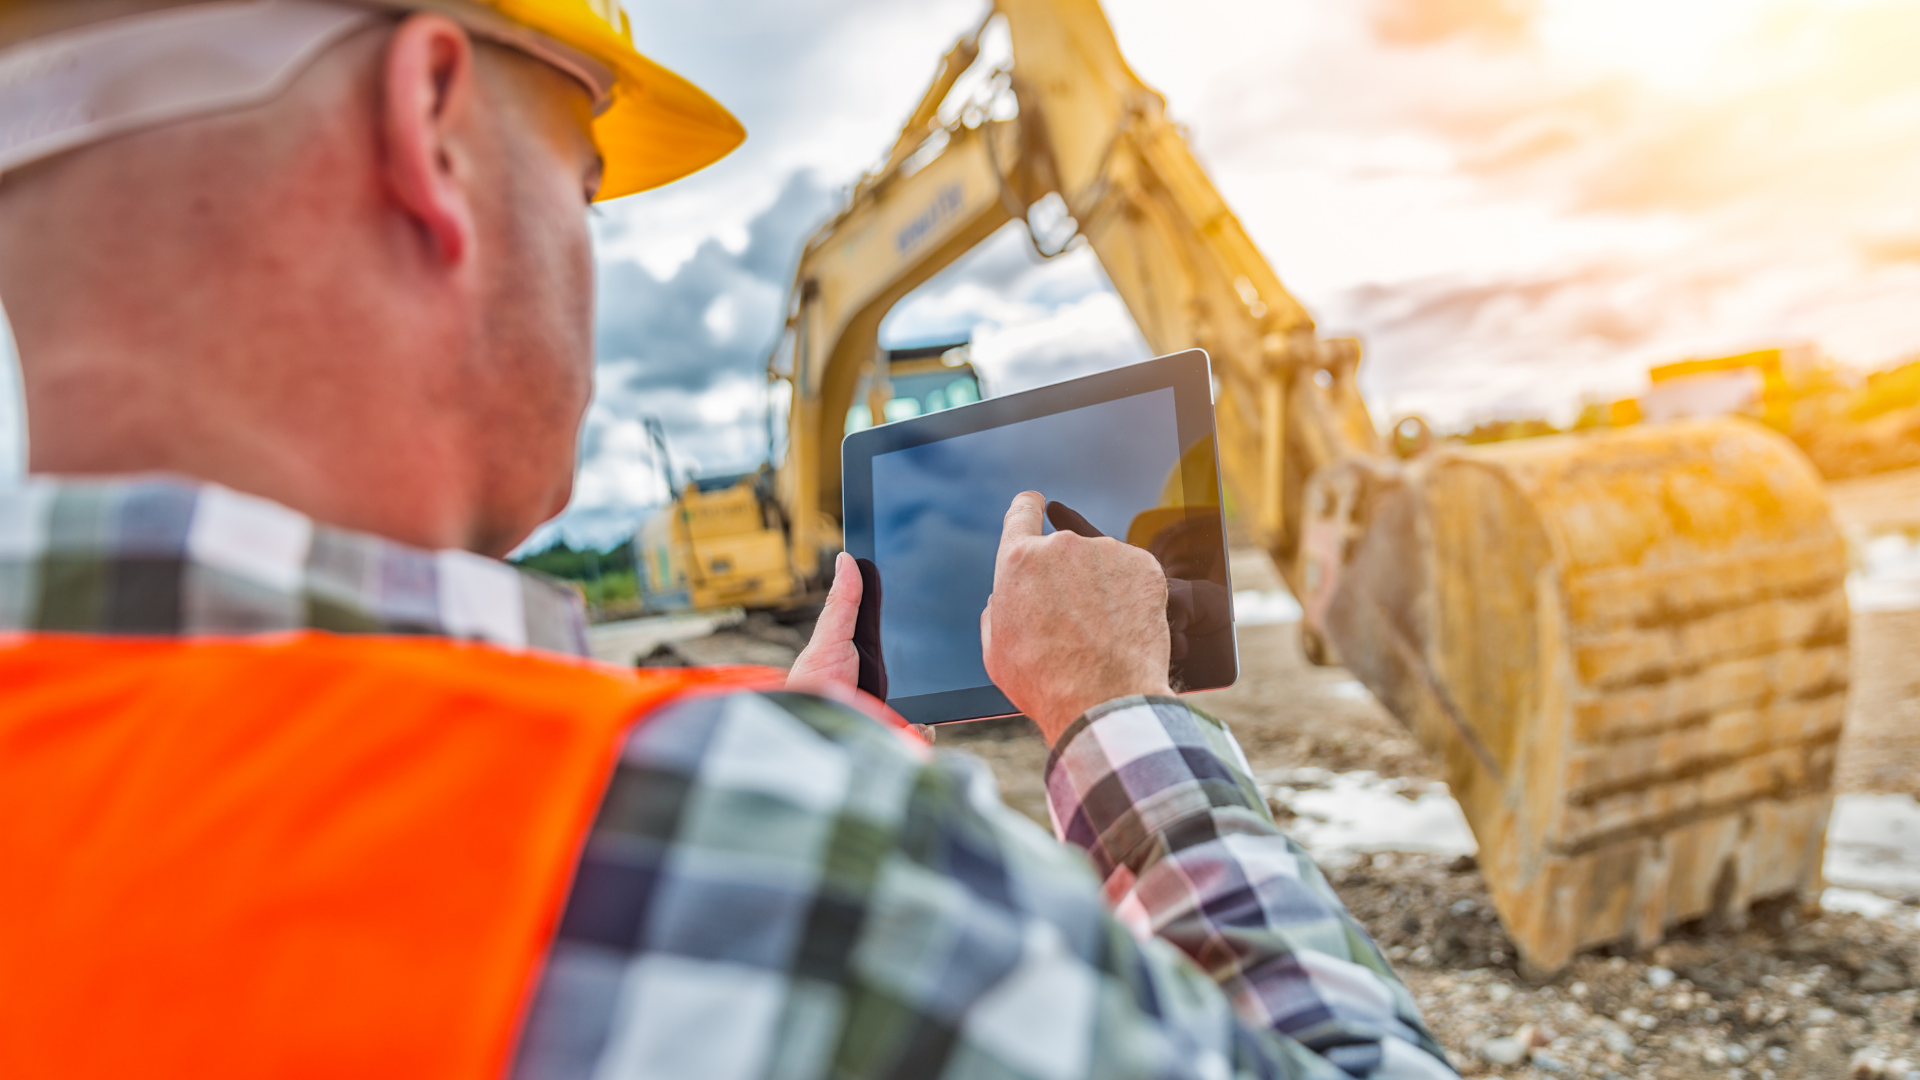 Ready to streamline your Fleet, Plant and Equipment Management?